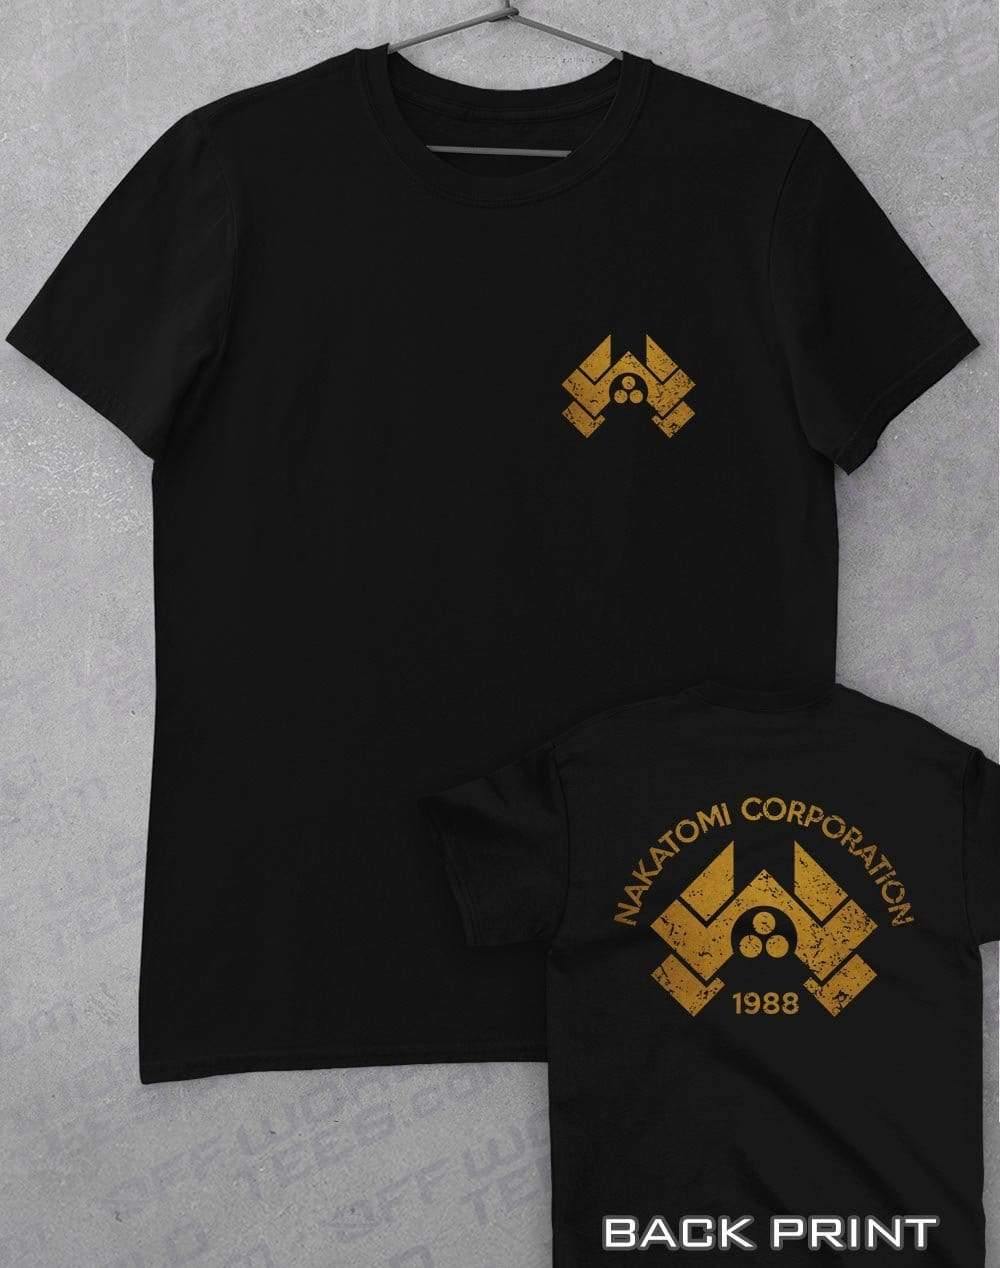 Nakatomi Corporation 1988 with Back Print T-Shirt S / Black  - Off World Tees